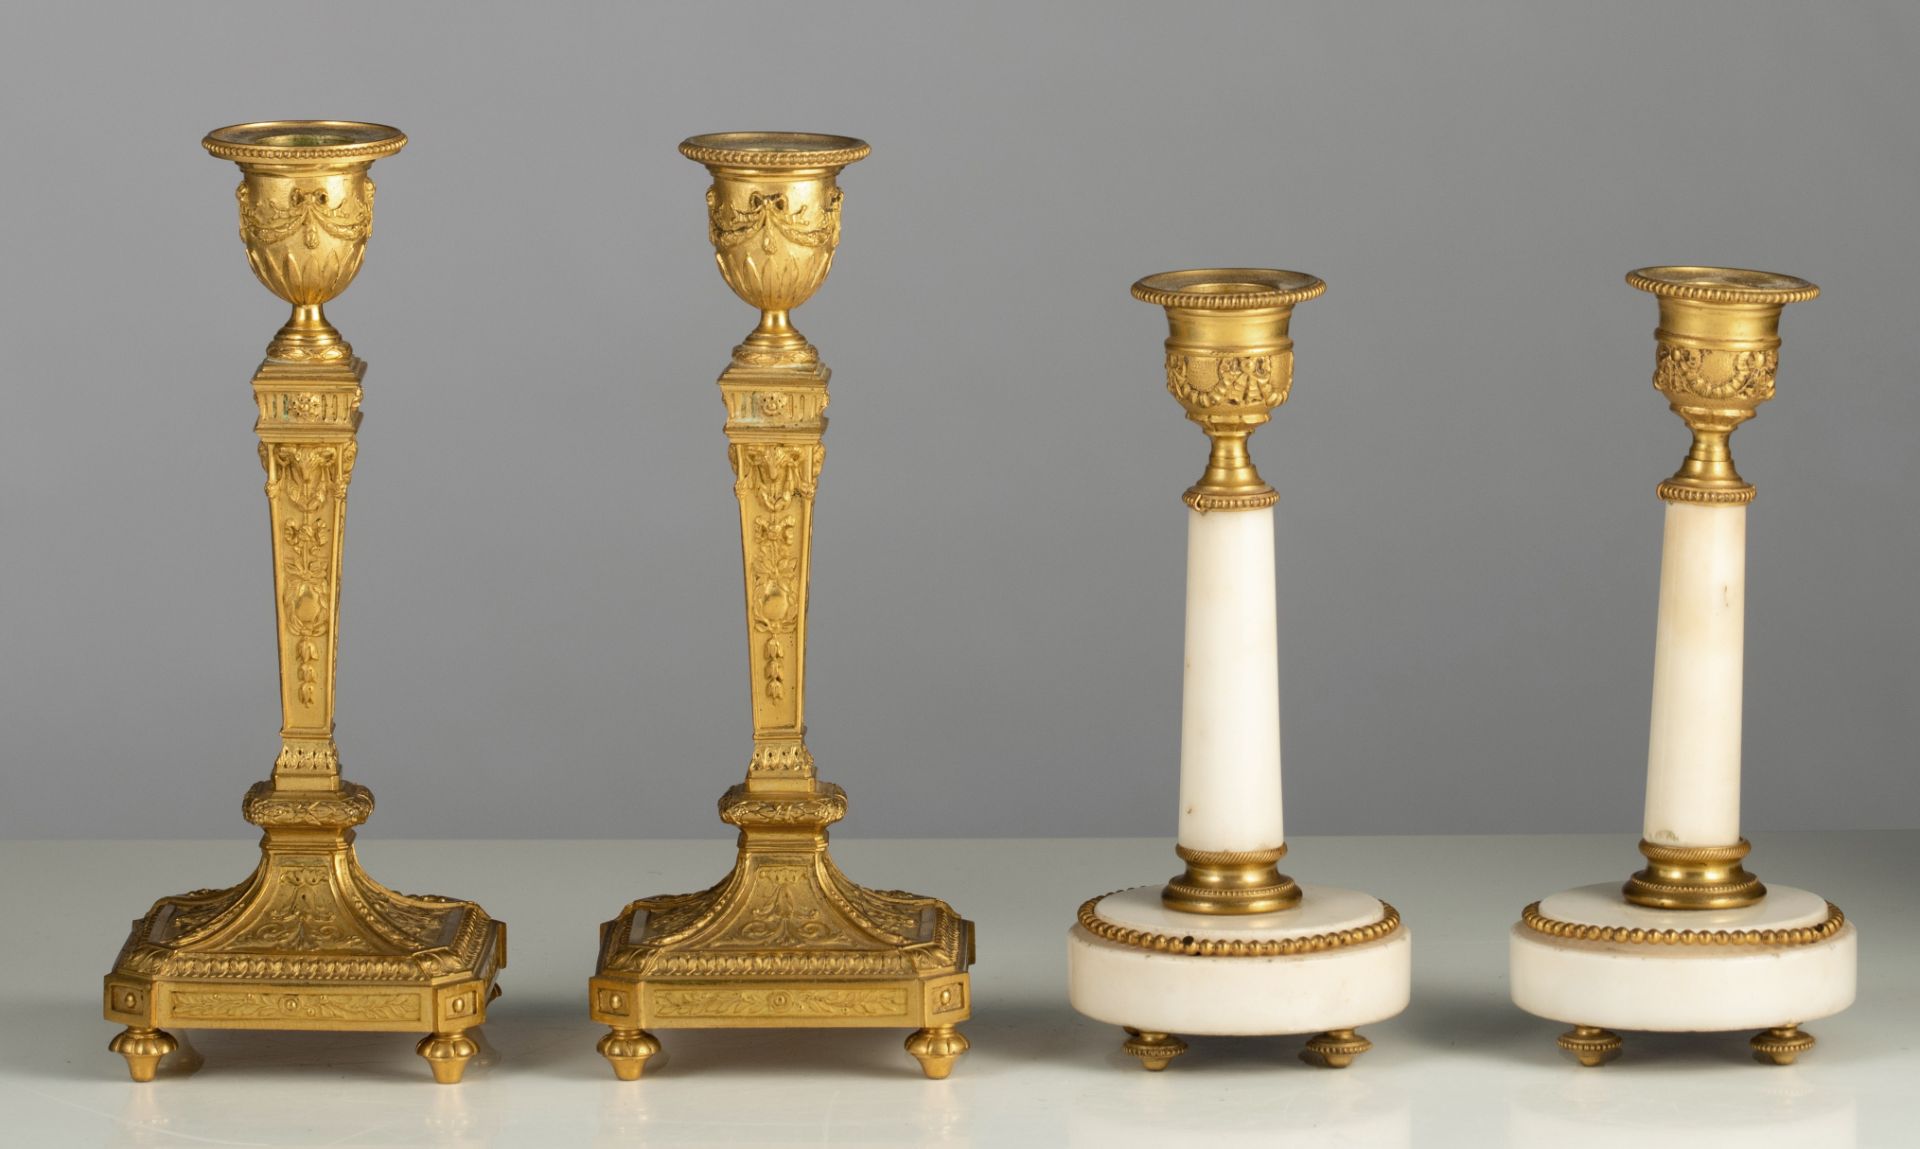 (BIDDING ONLY ON CARLOBONTE.BE) Two pairs of Neoclassical candlesticks, H 17,5 - 21 cm - Image 2 of 8